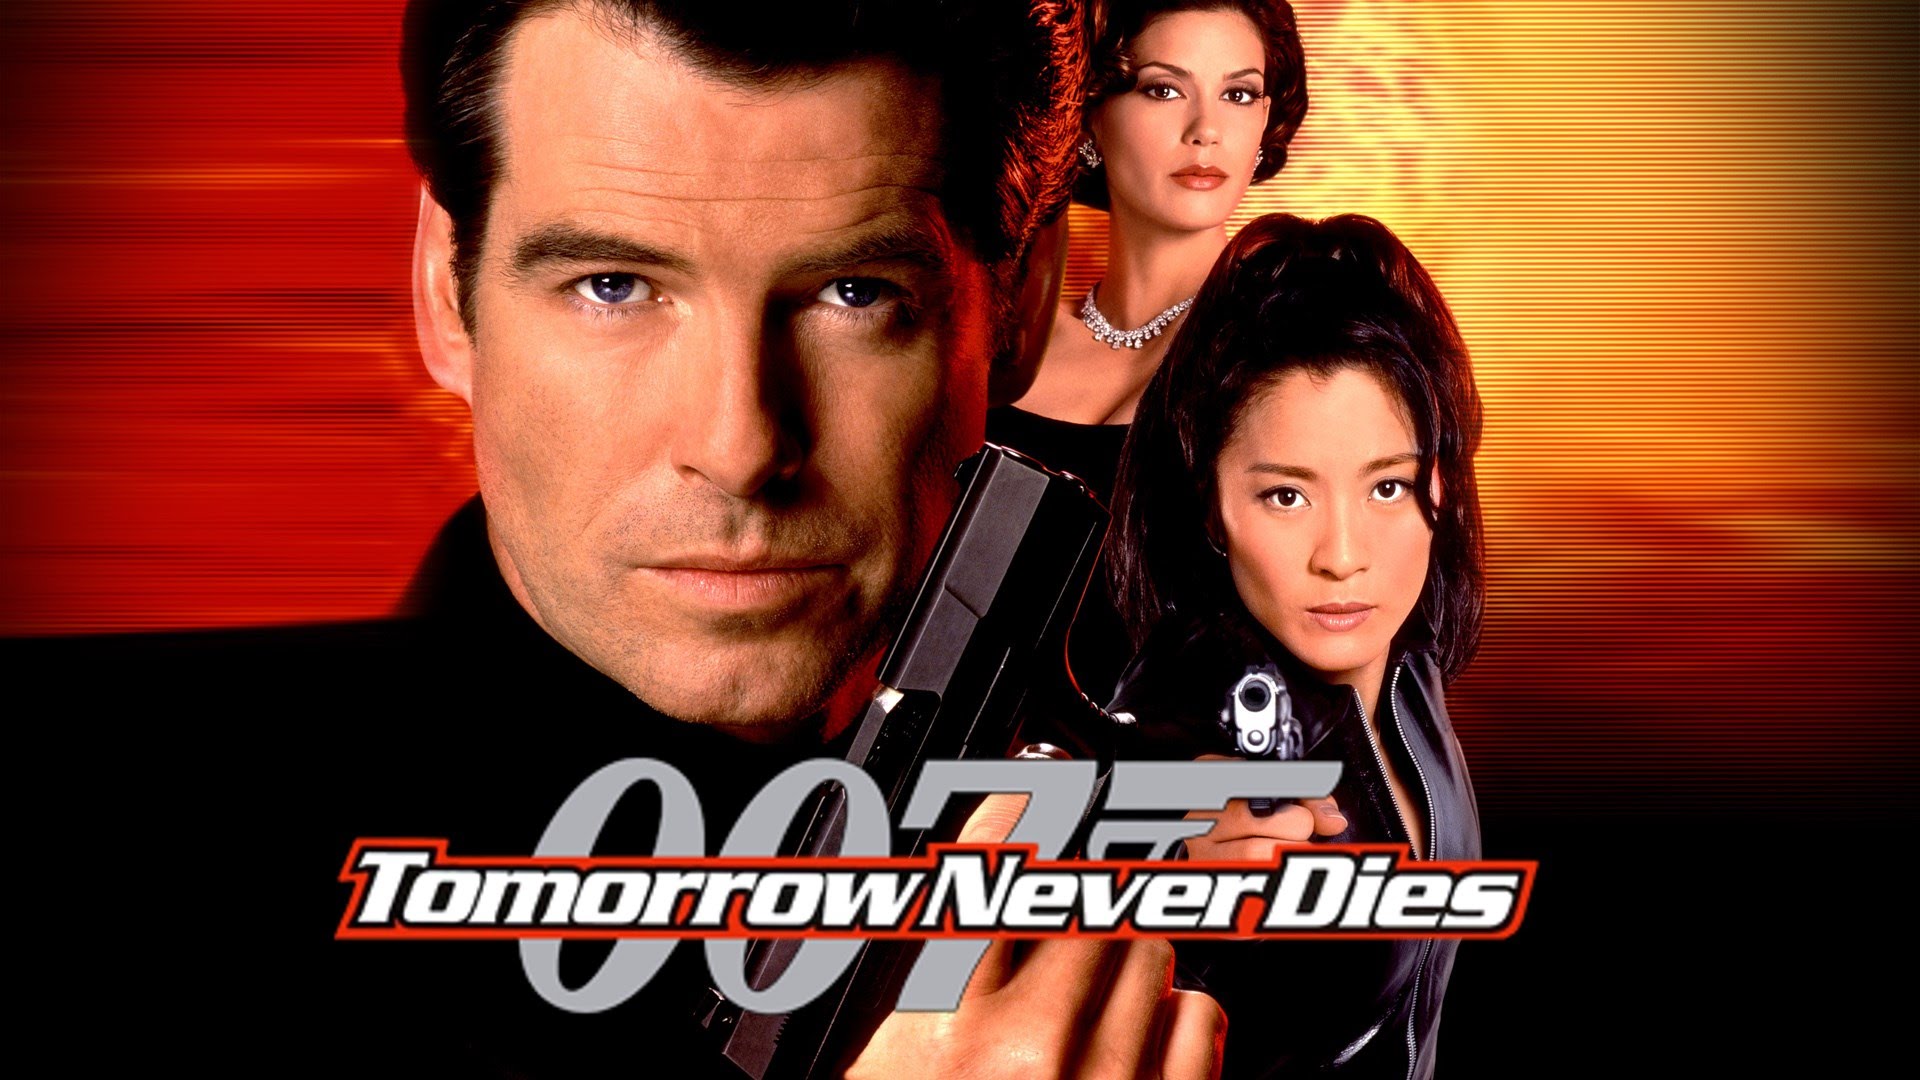 1920x1080 > 007: Tomorrow Never Dies Wallpapers